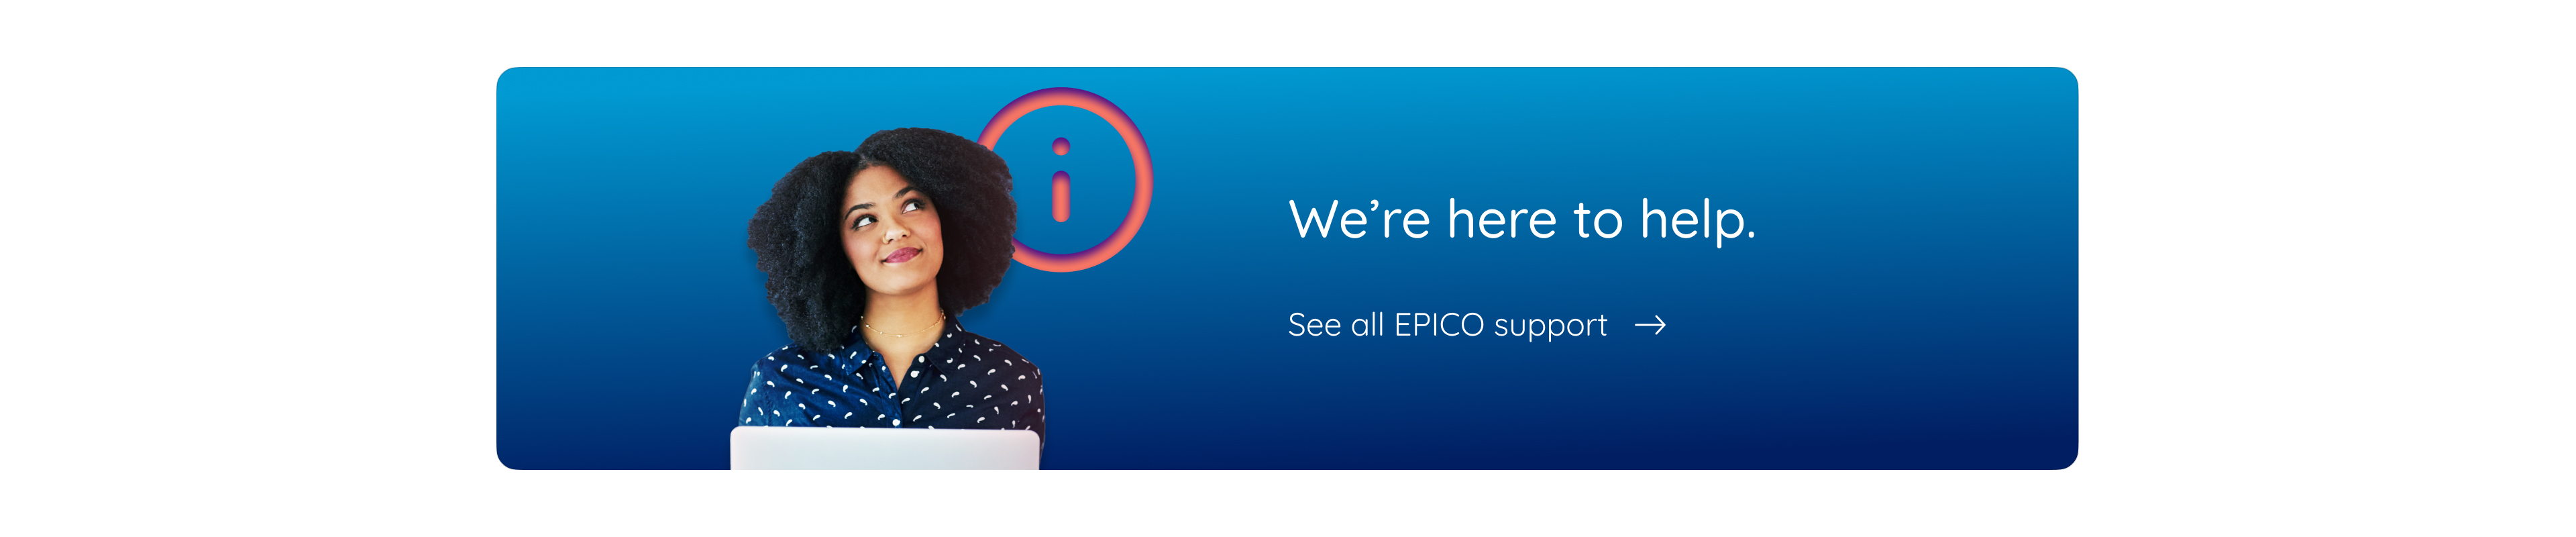 We’re here to help. See all EPICO support.